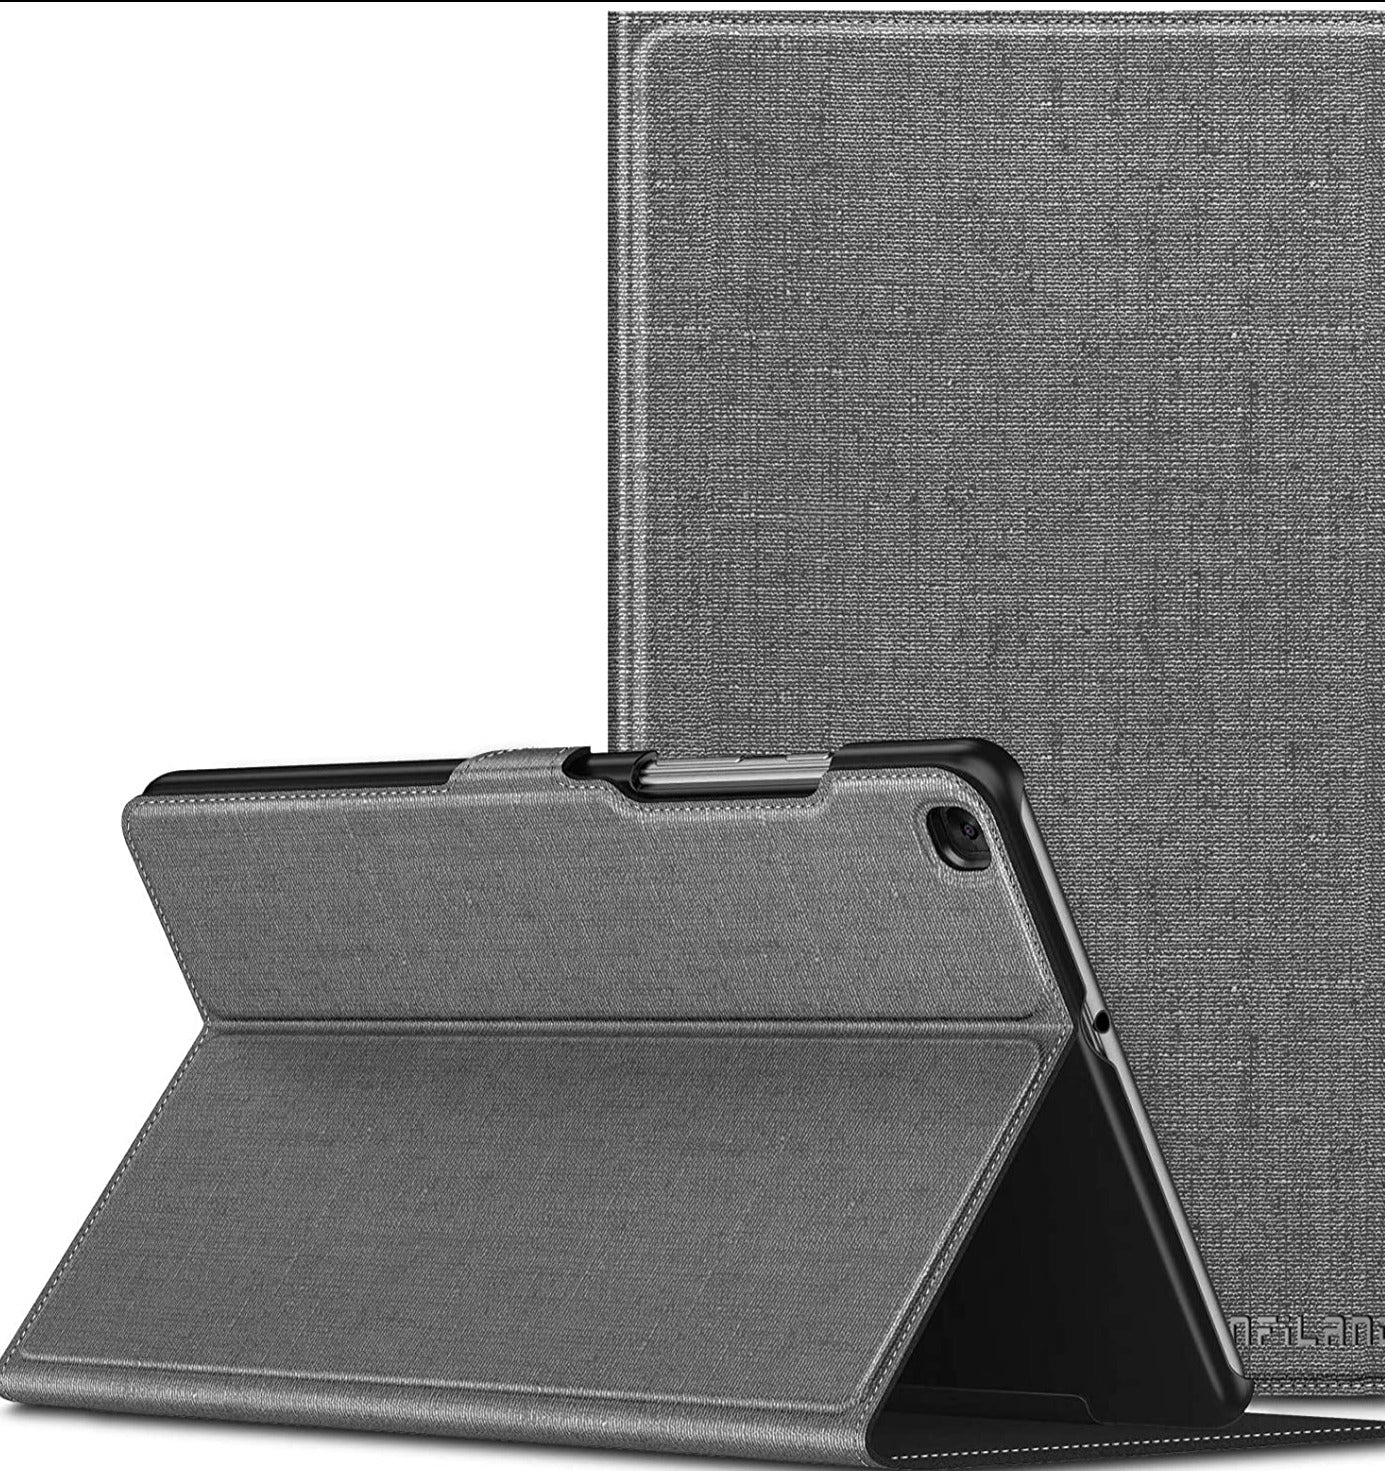 Infiland Samsung Galaxy Tab A 10.1 2019 Case, Multi-Angle Business Cover Built in Pocket  - GRAY - e4cents